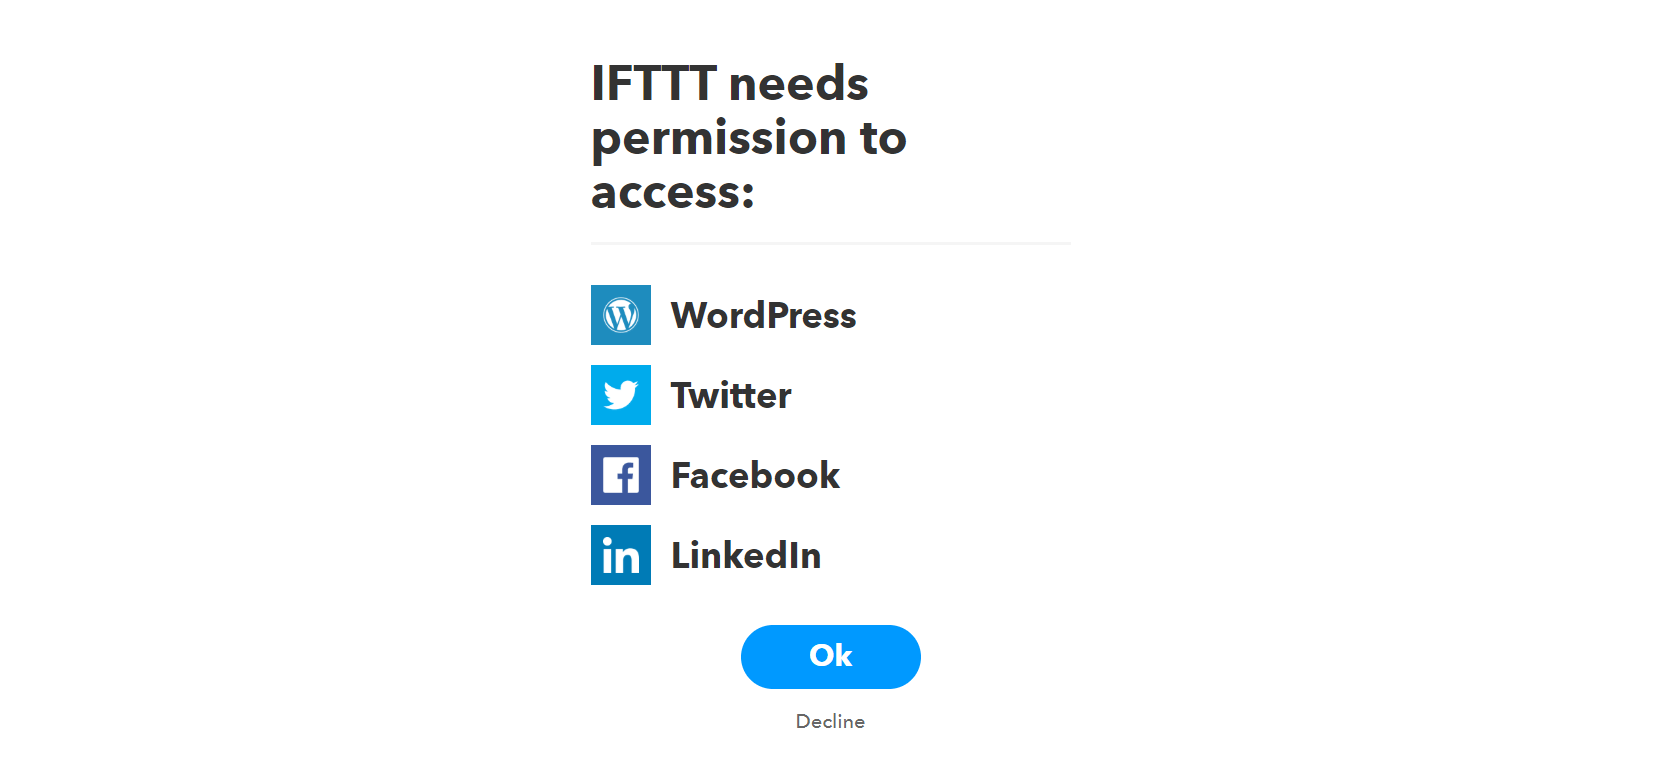 An IFTTT applet requesting permission to access platforms.